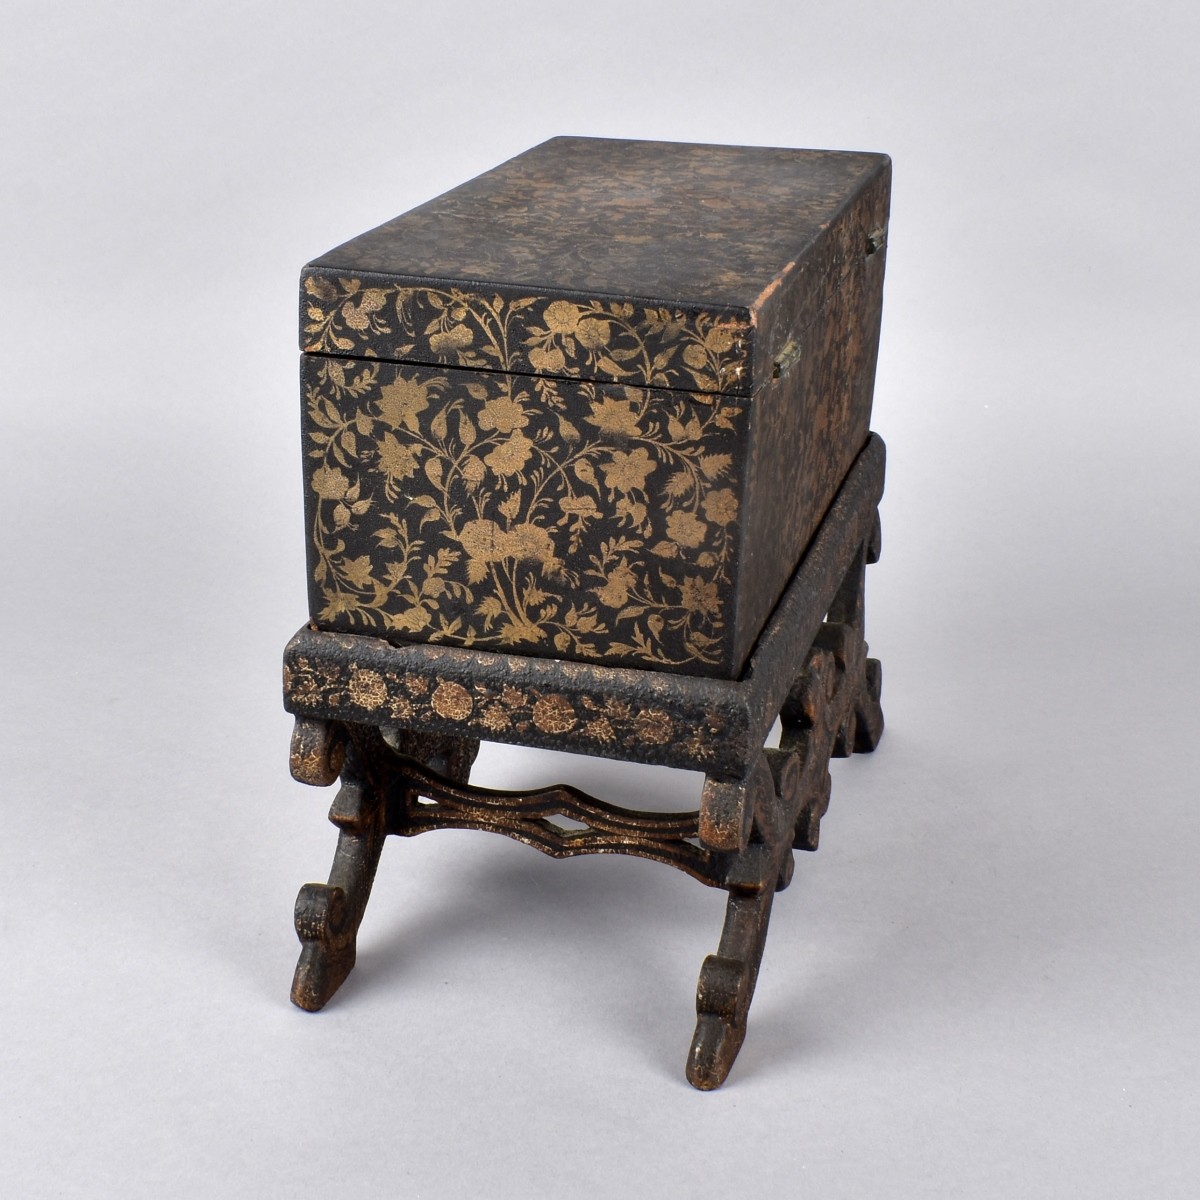 Gilt Painted Box with Associated Stand